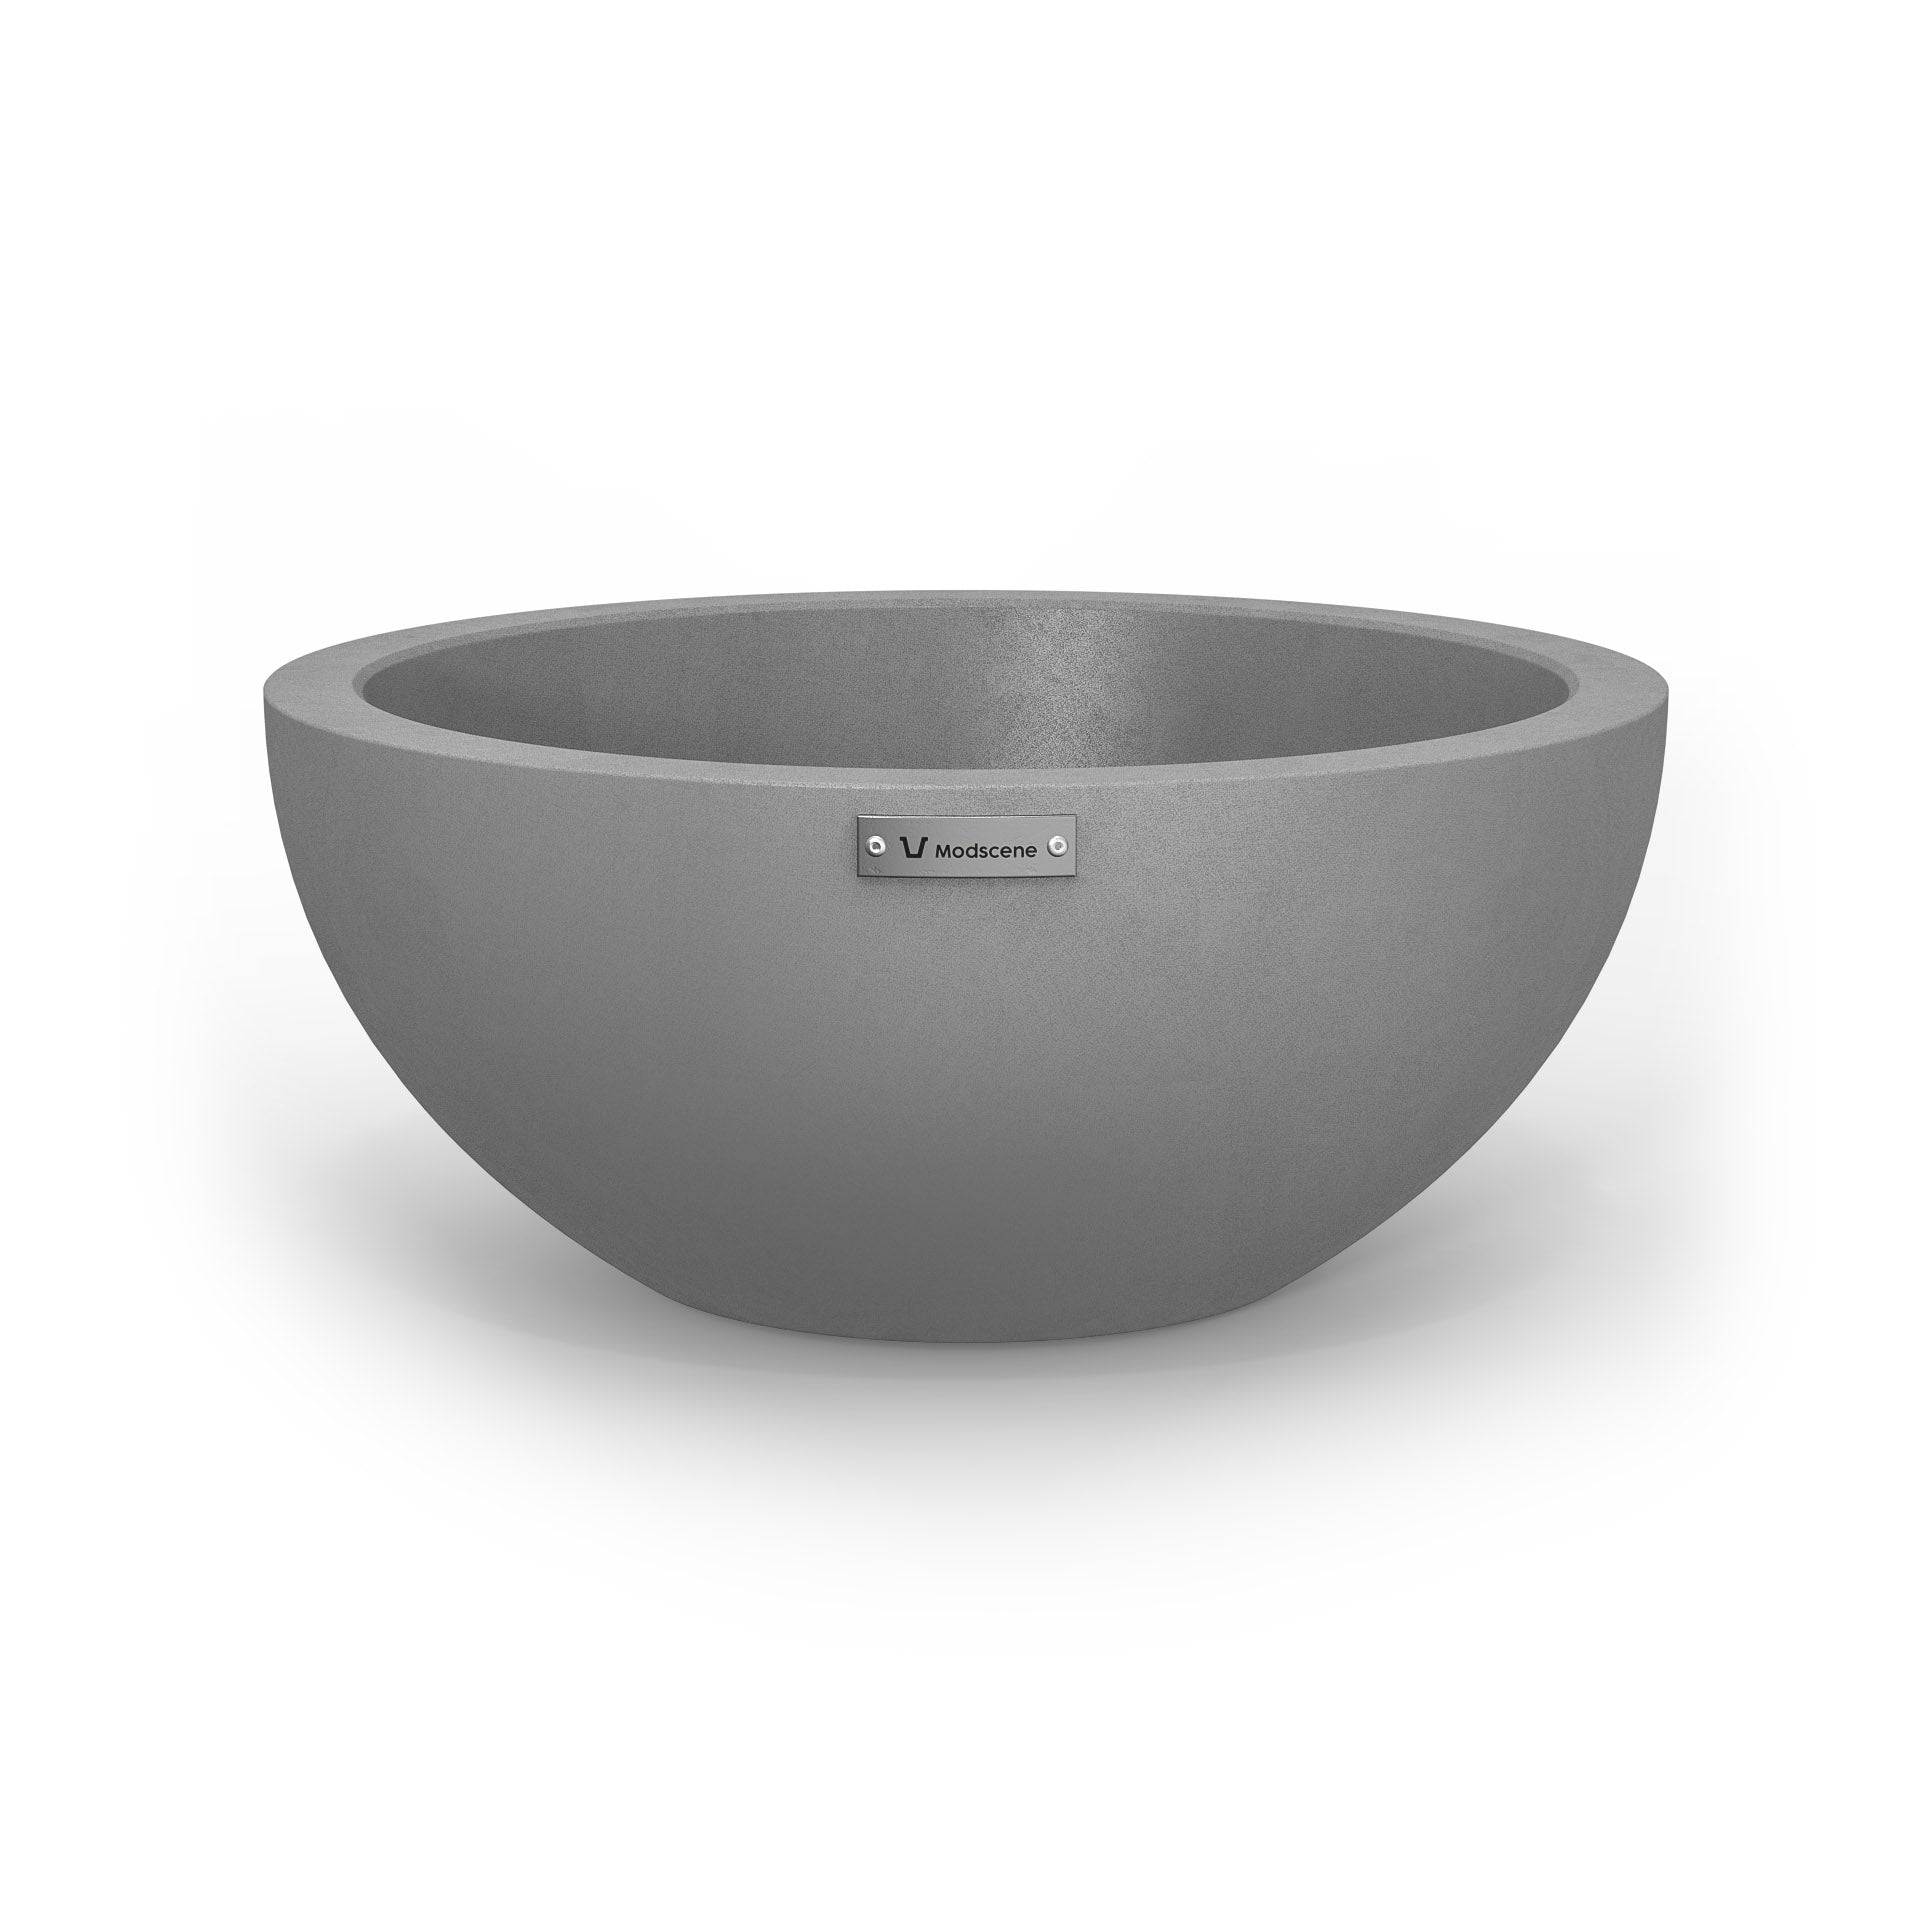 A small planter bowl in a concrete grey colour made by Modscene.